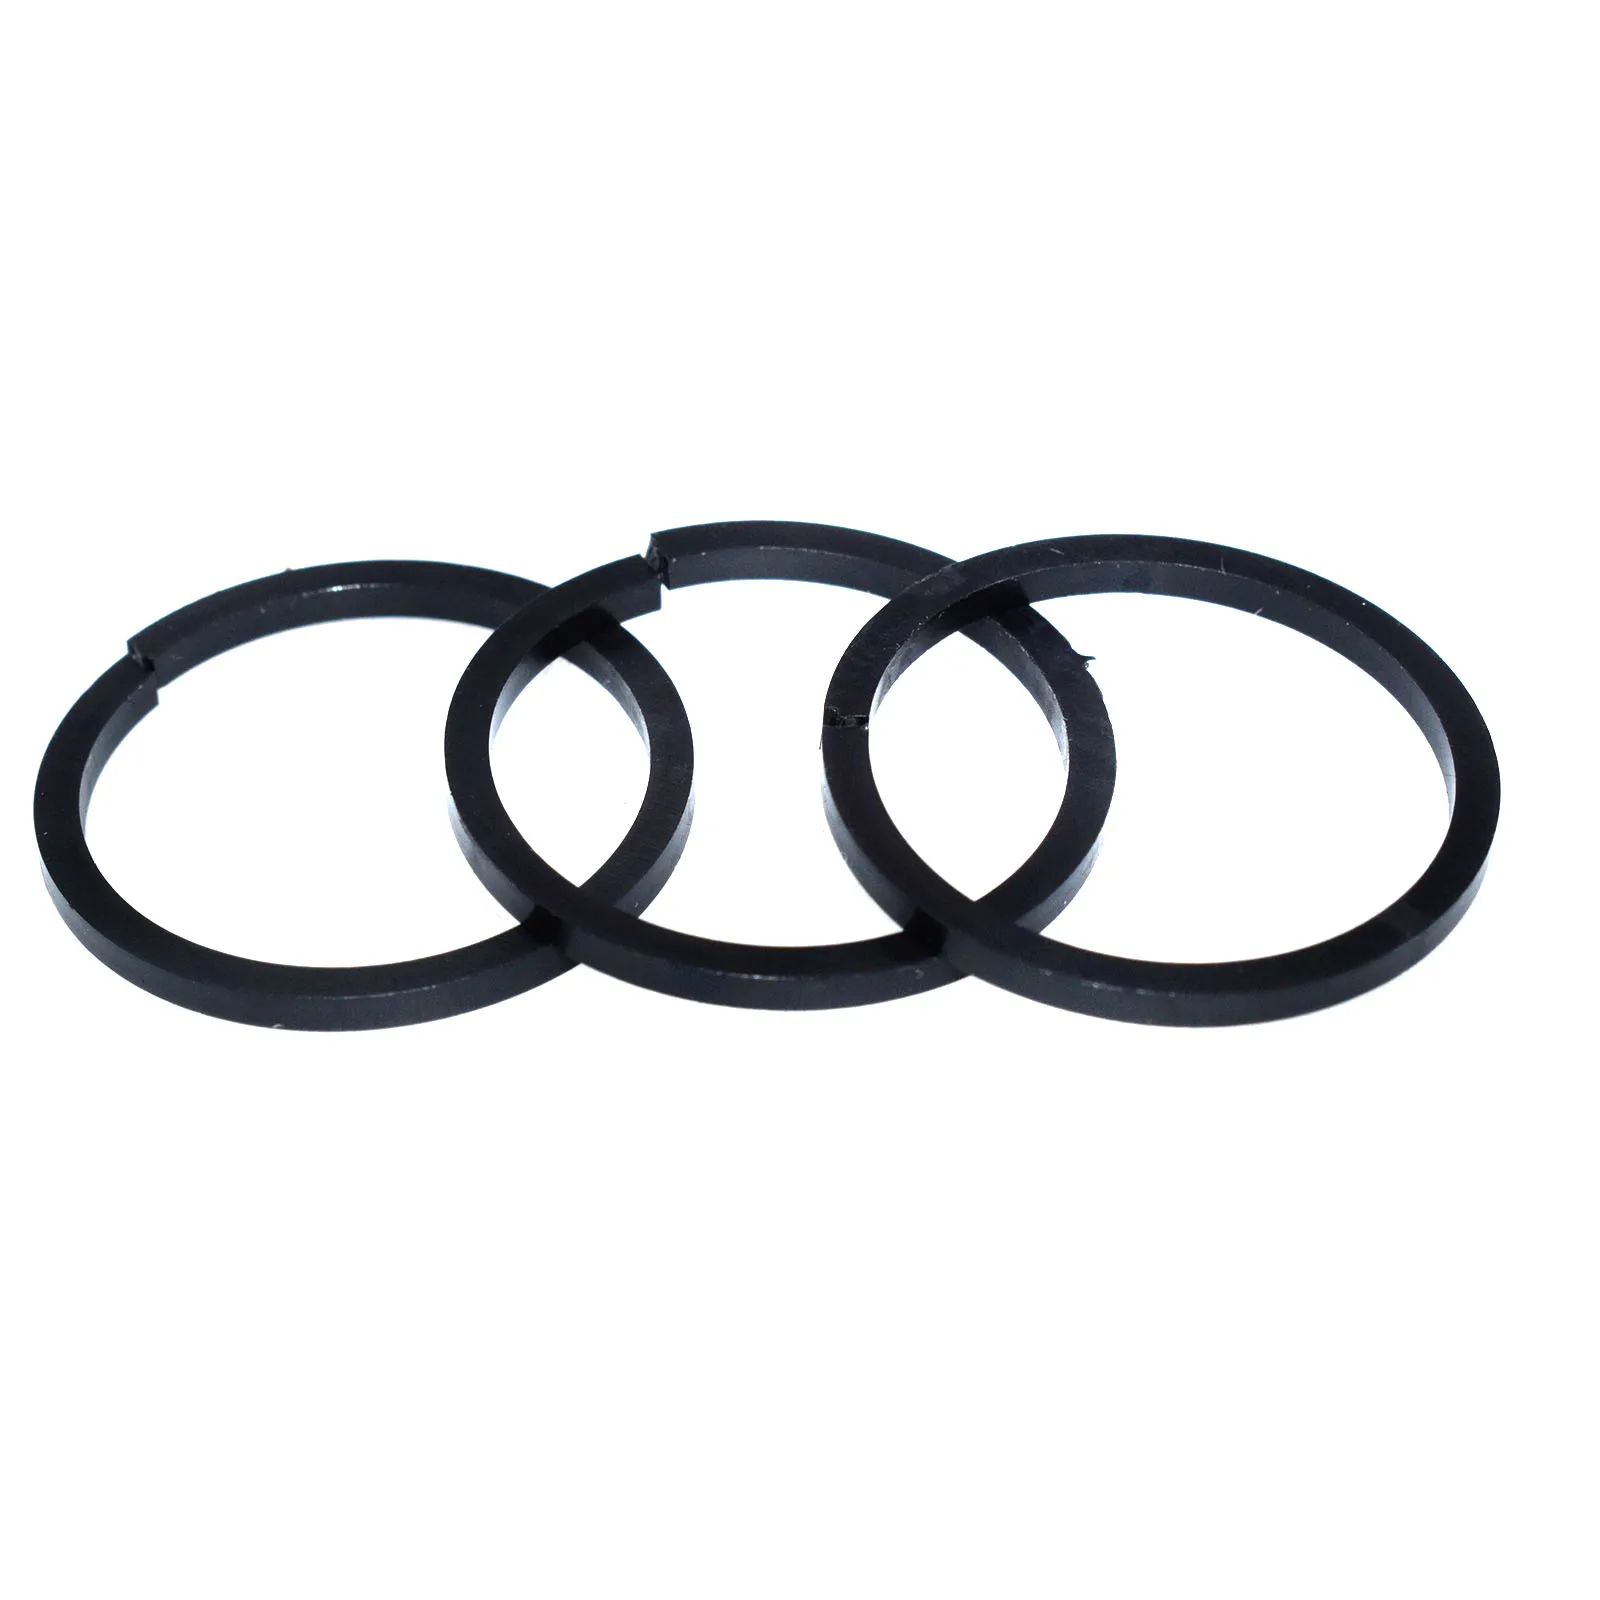 Camshaft Adjuster Oil Control Seal Rings For VW Audi 06F198107A 3